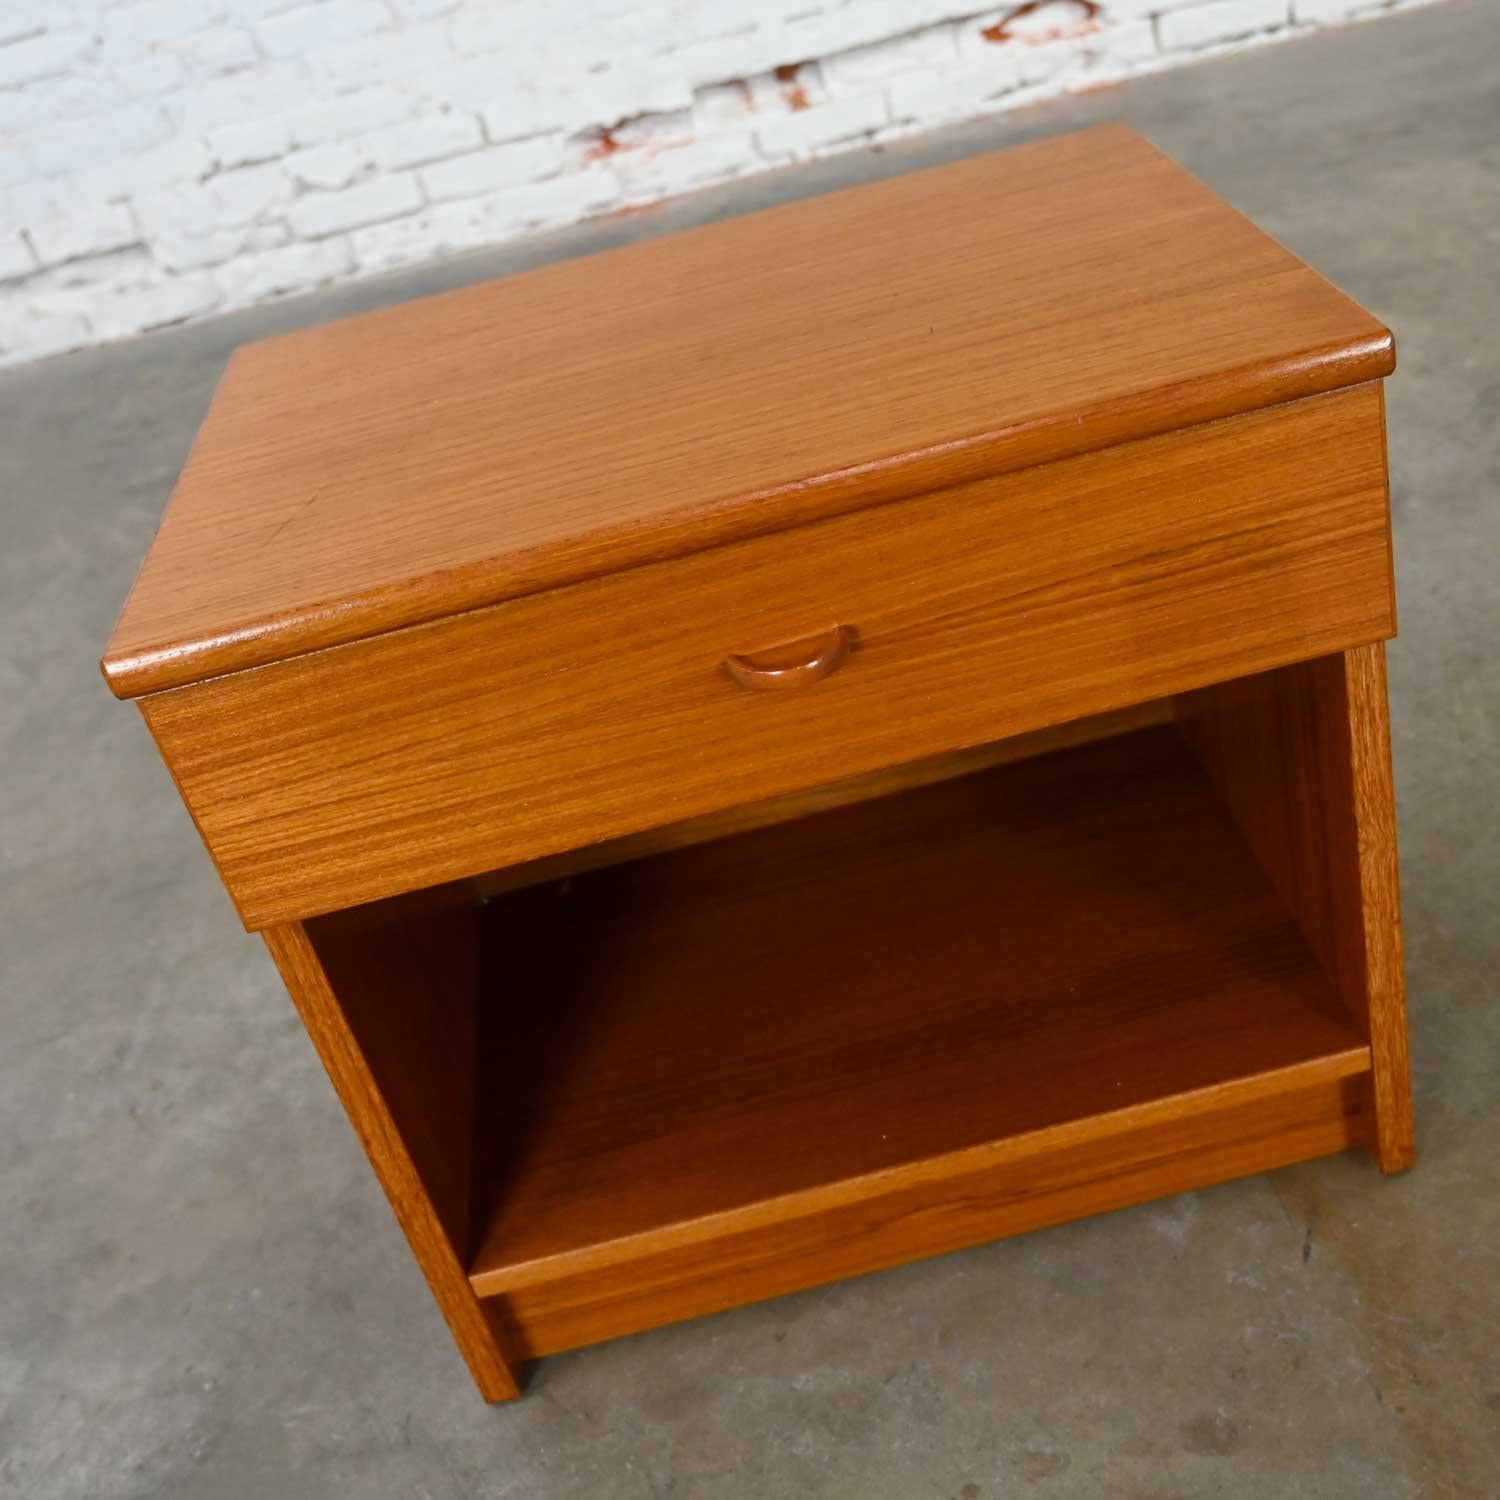 Handsome Scandinavian Modern teak nightstand or end table with single drawer by FBJ Mobler. Beautiful condition, keeping in mind that this is vintage and not new so will have signs of use and wear. We have oiled the finish. Please see photos and